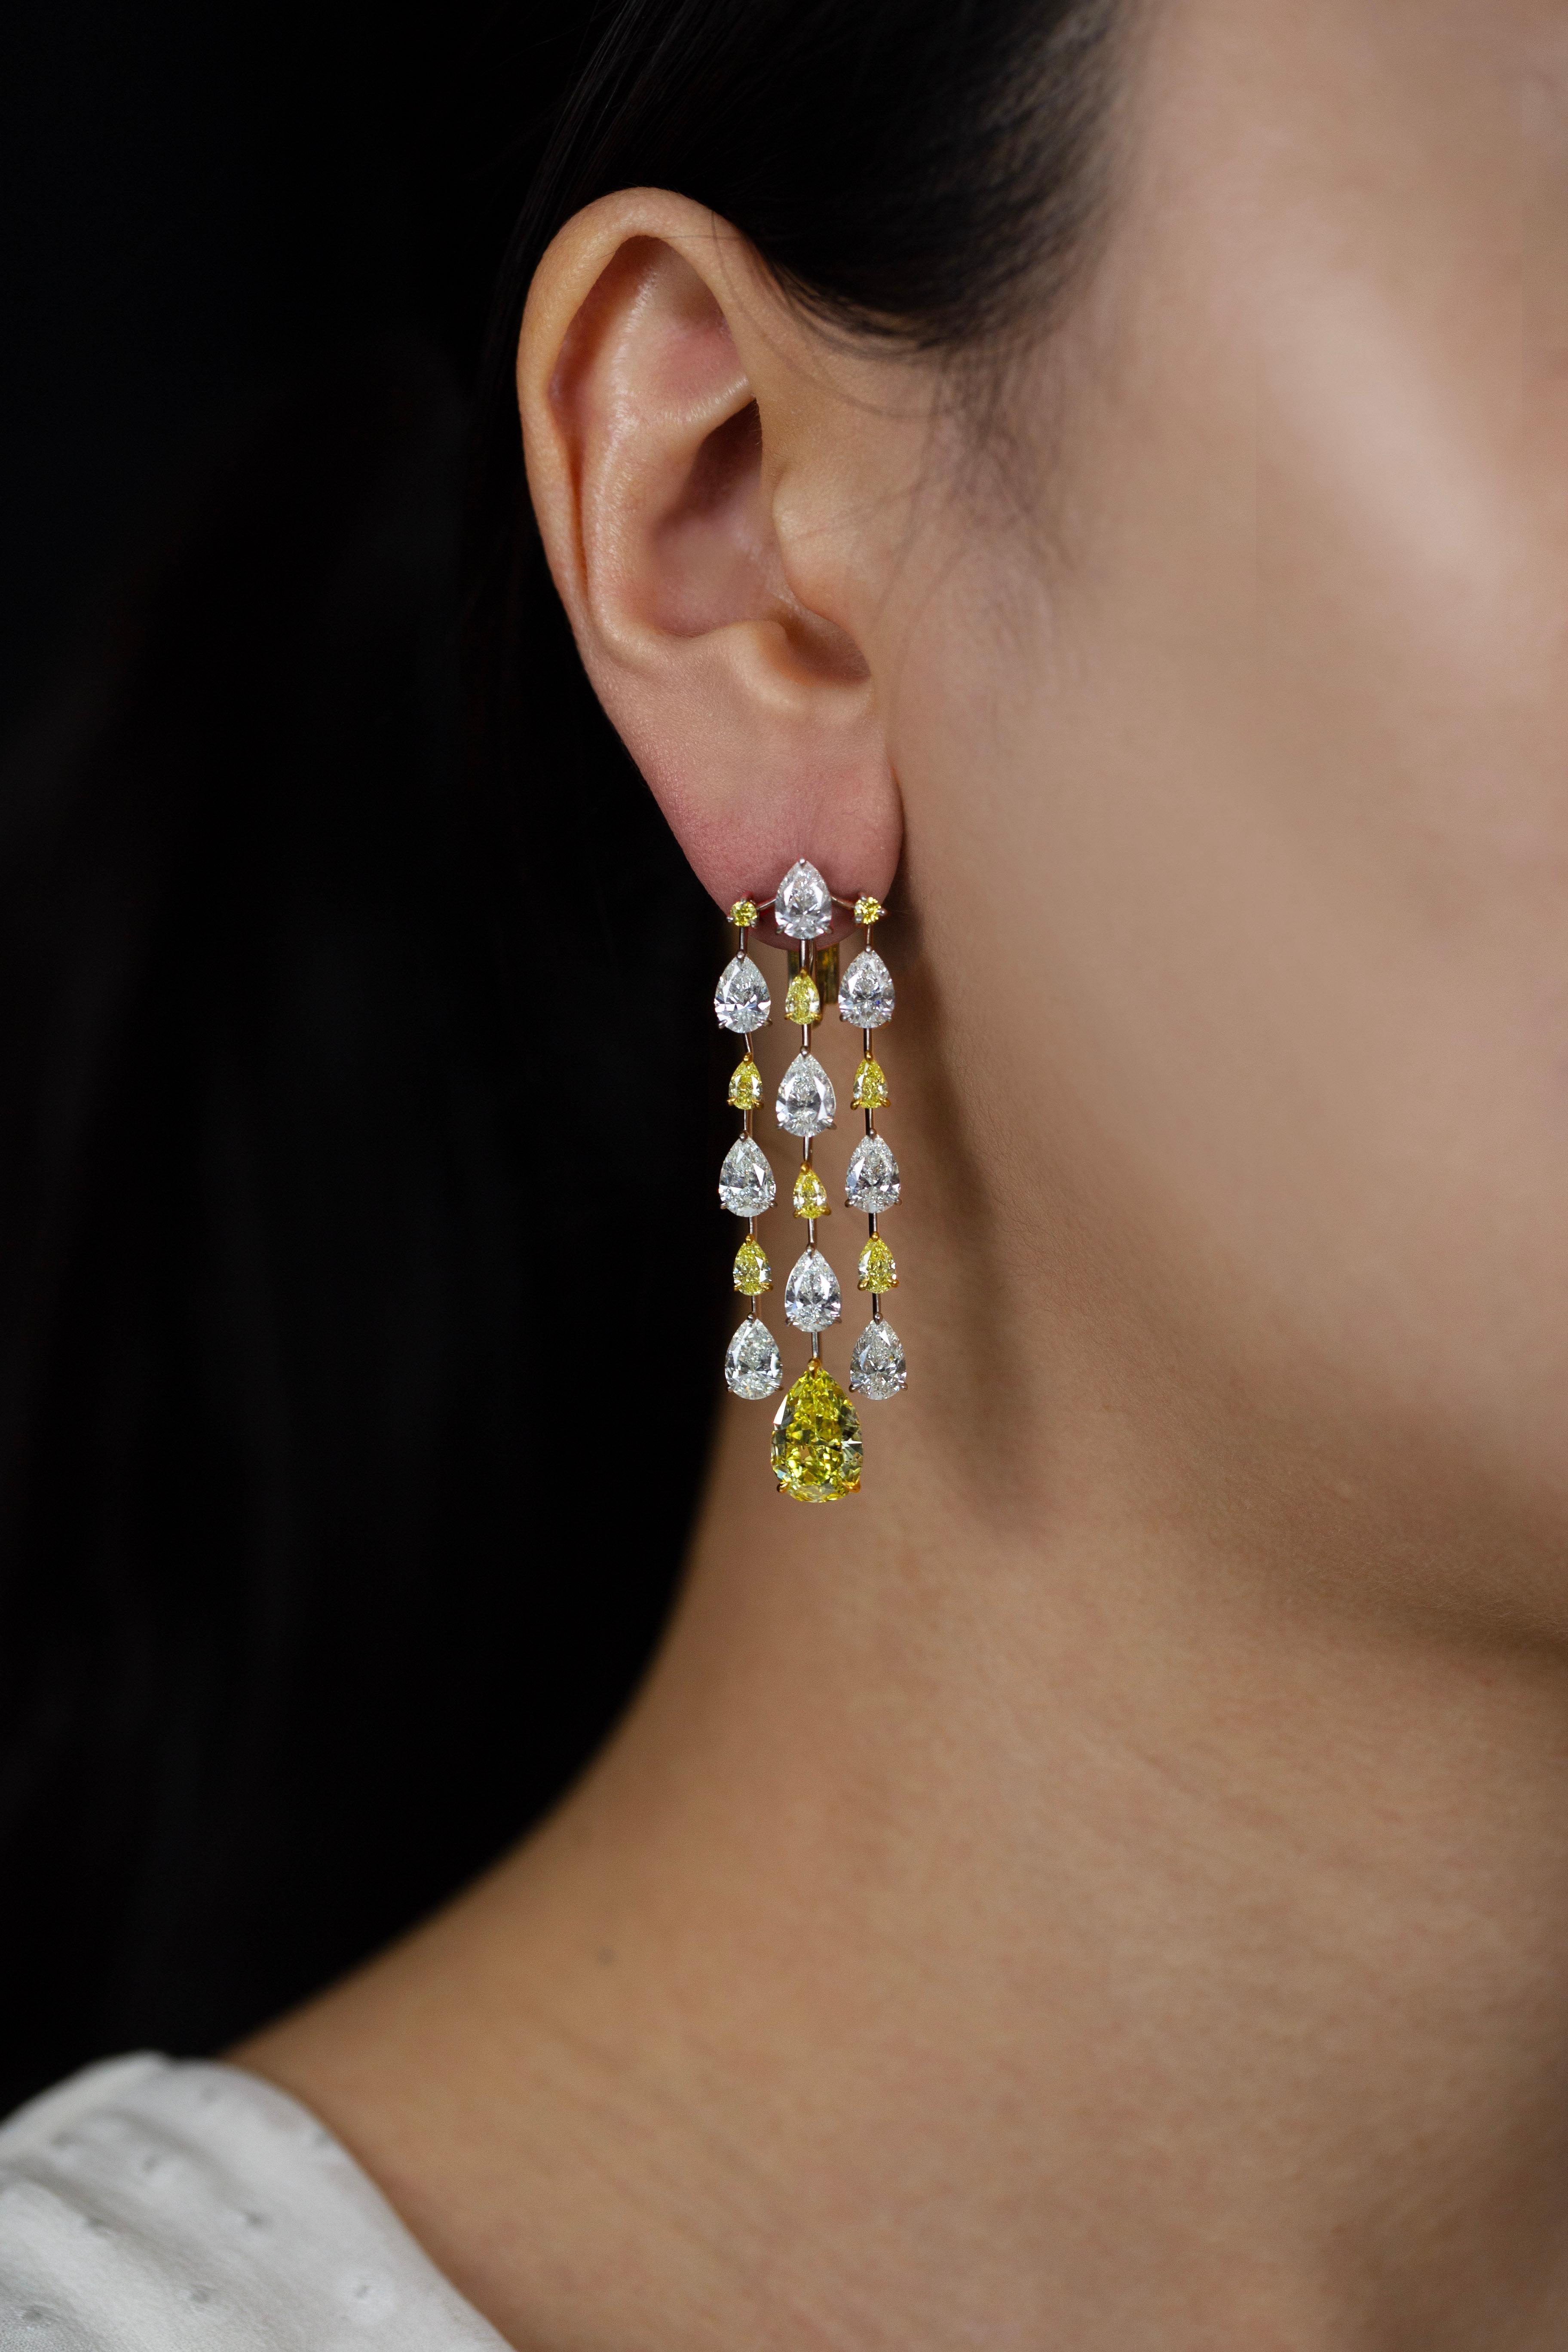 Contemporary 15.69 Carats Total Pear Shape Fancy Yellow White Diamond Chandelier Earrings For Sale